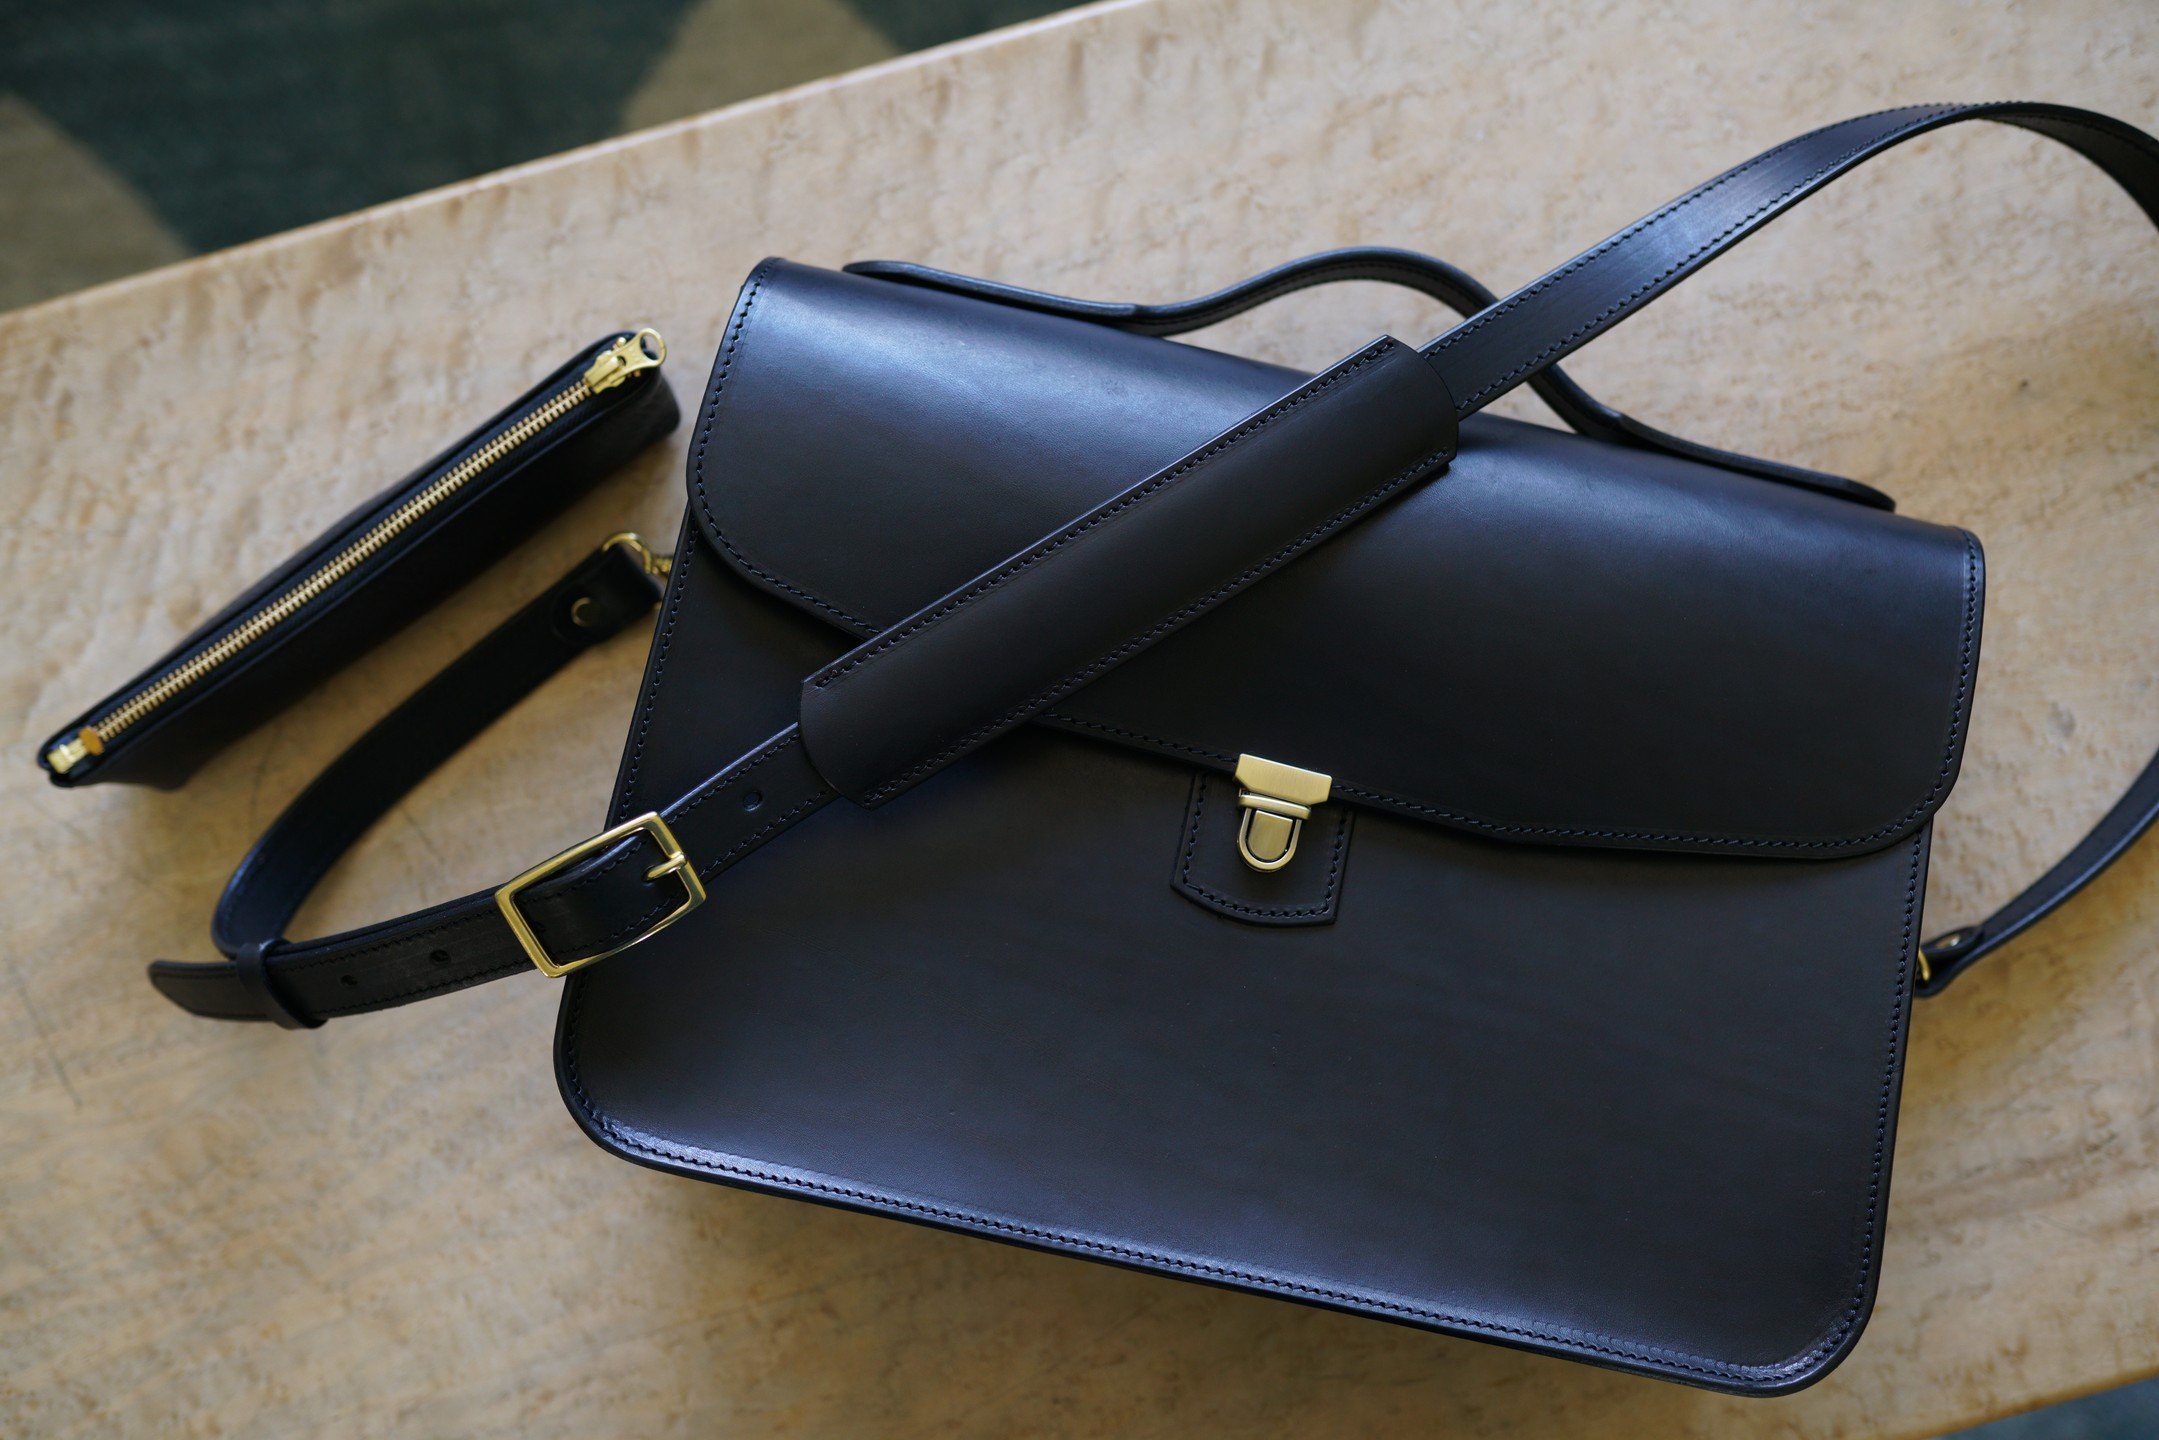 Another custom messenger bag&ndash;&ndash;this time in 5/6oz black bridle leather with solid brass hardware. Tons of pocket options inside plus an added zipper pouch for writing implements. Made to fit a 16&rdquo; Macbook Pro with lots of room for da